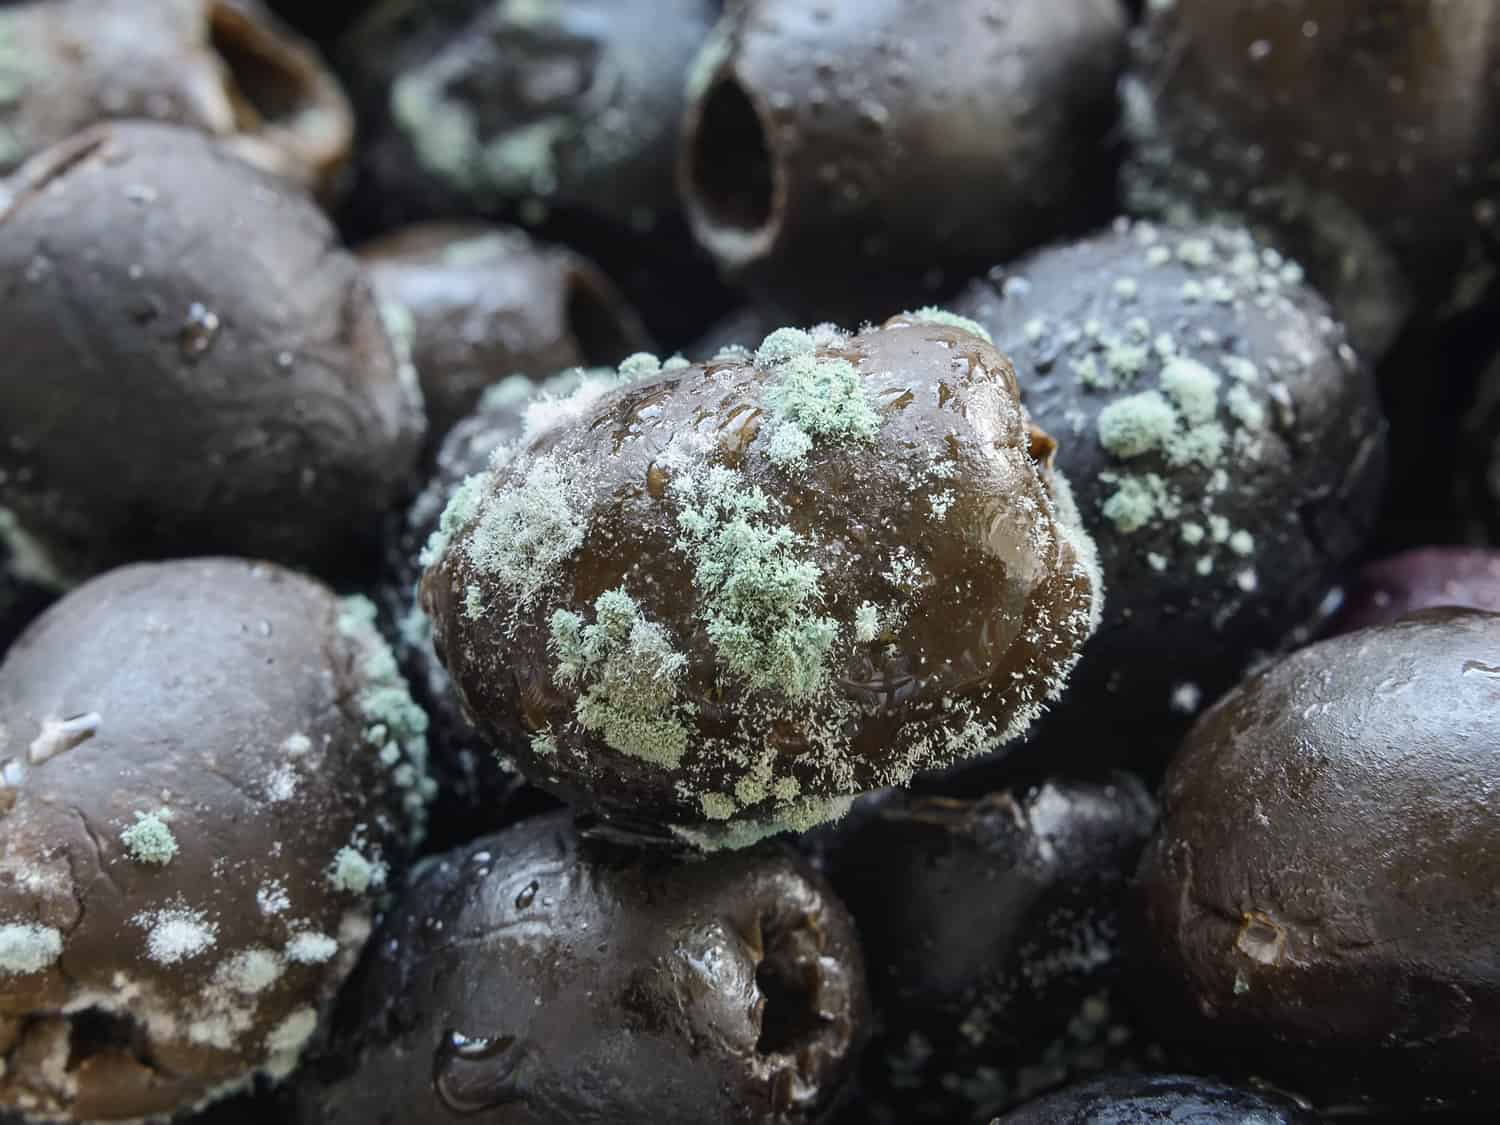 Macrophotography of spoiled olives with white green mold